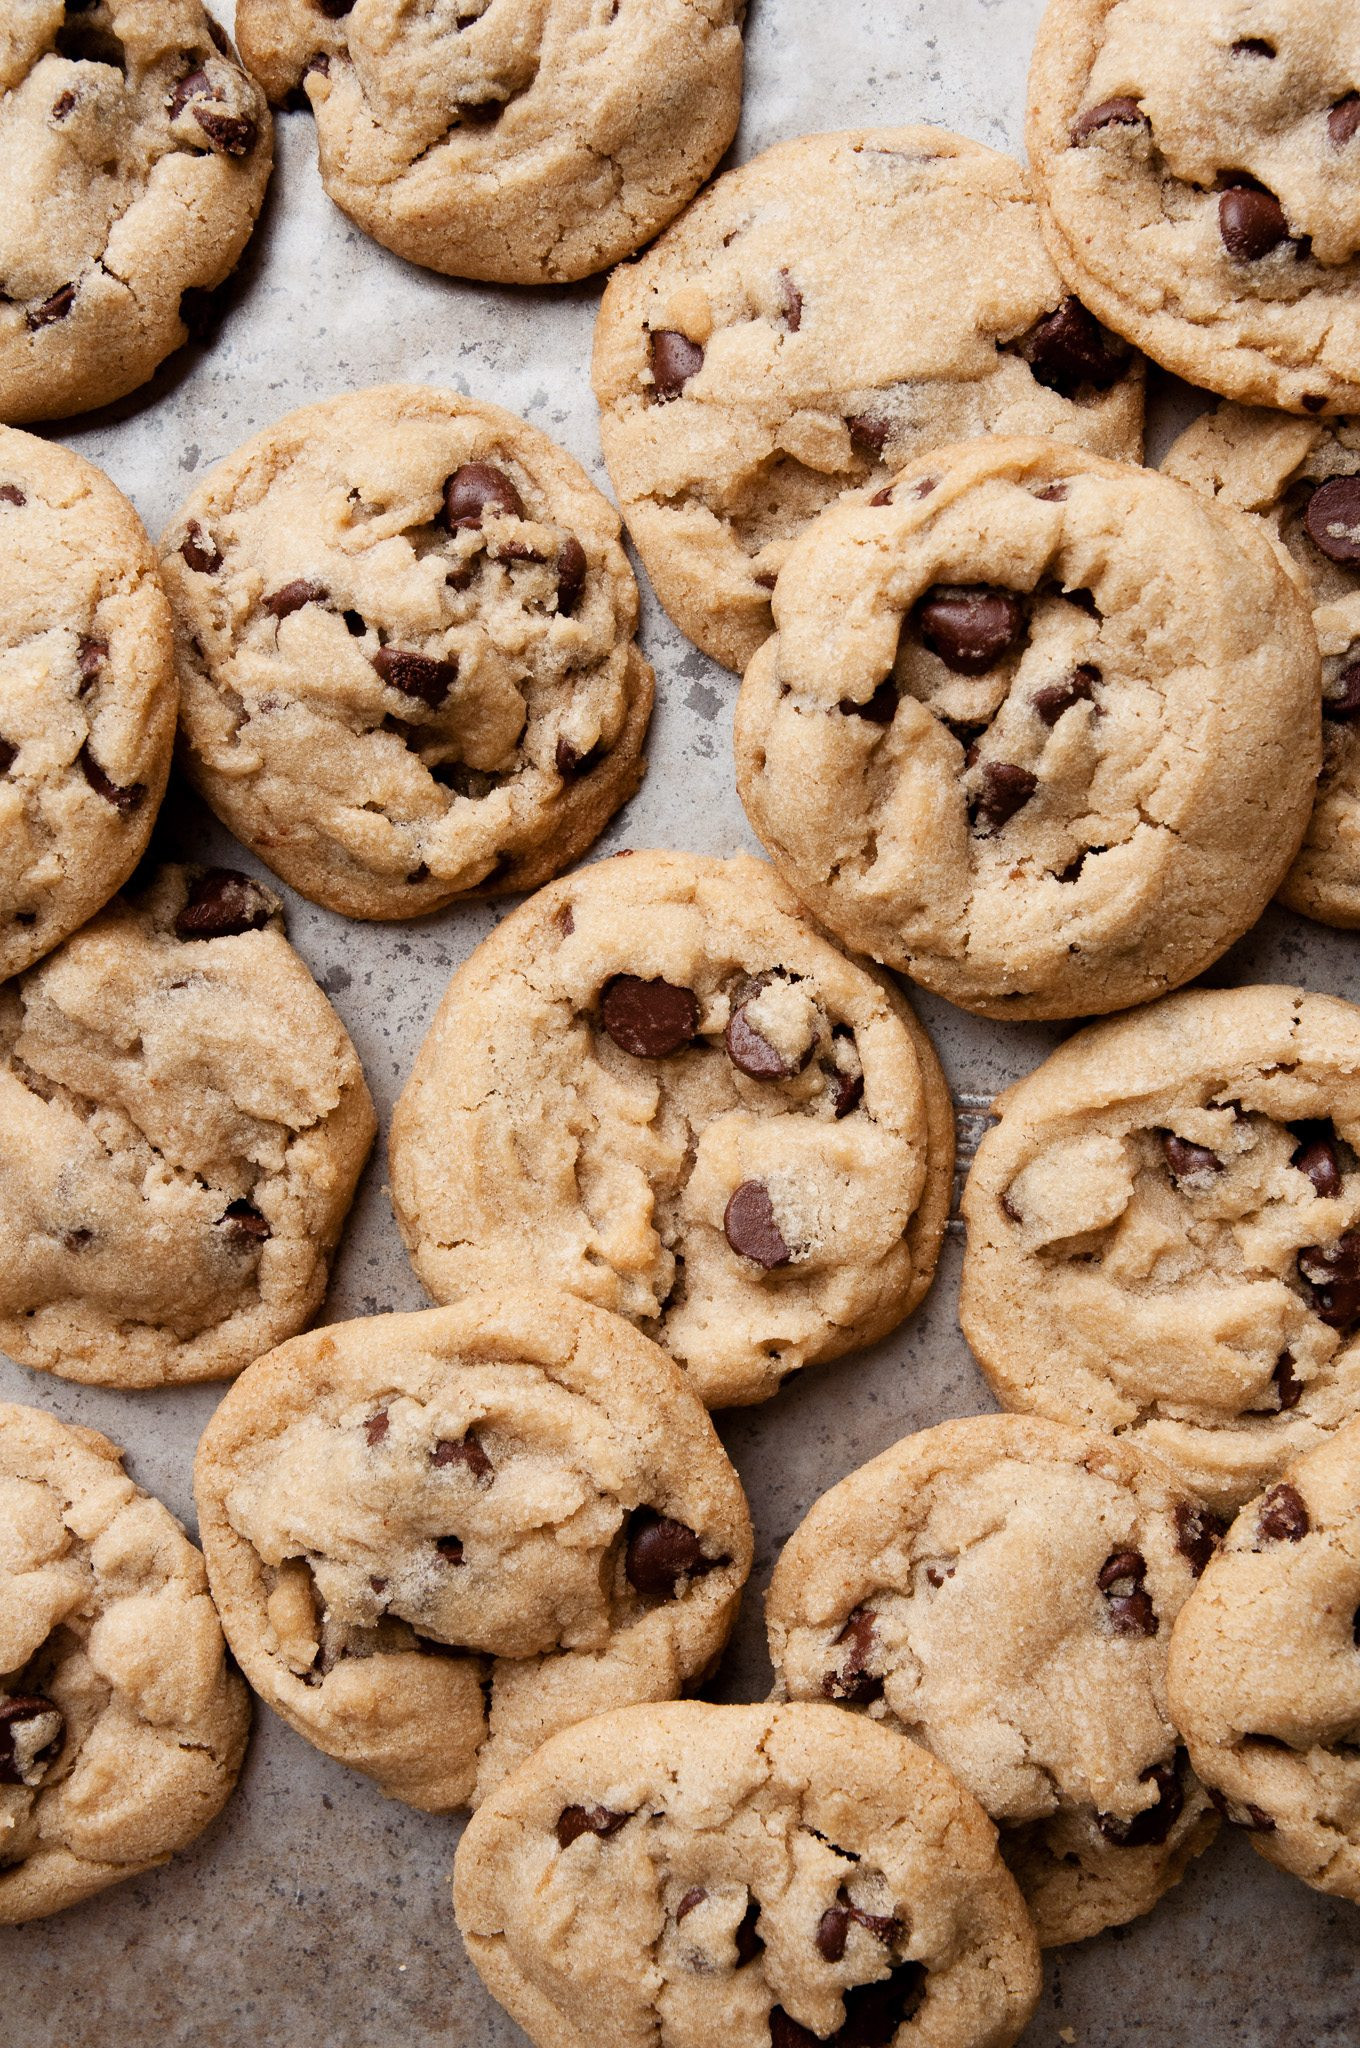 Chocolate Chocolate Chip Cookies
 15 of the Best Chocolate Chip Cookie Recipes The